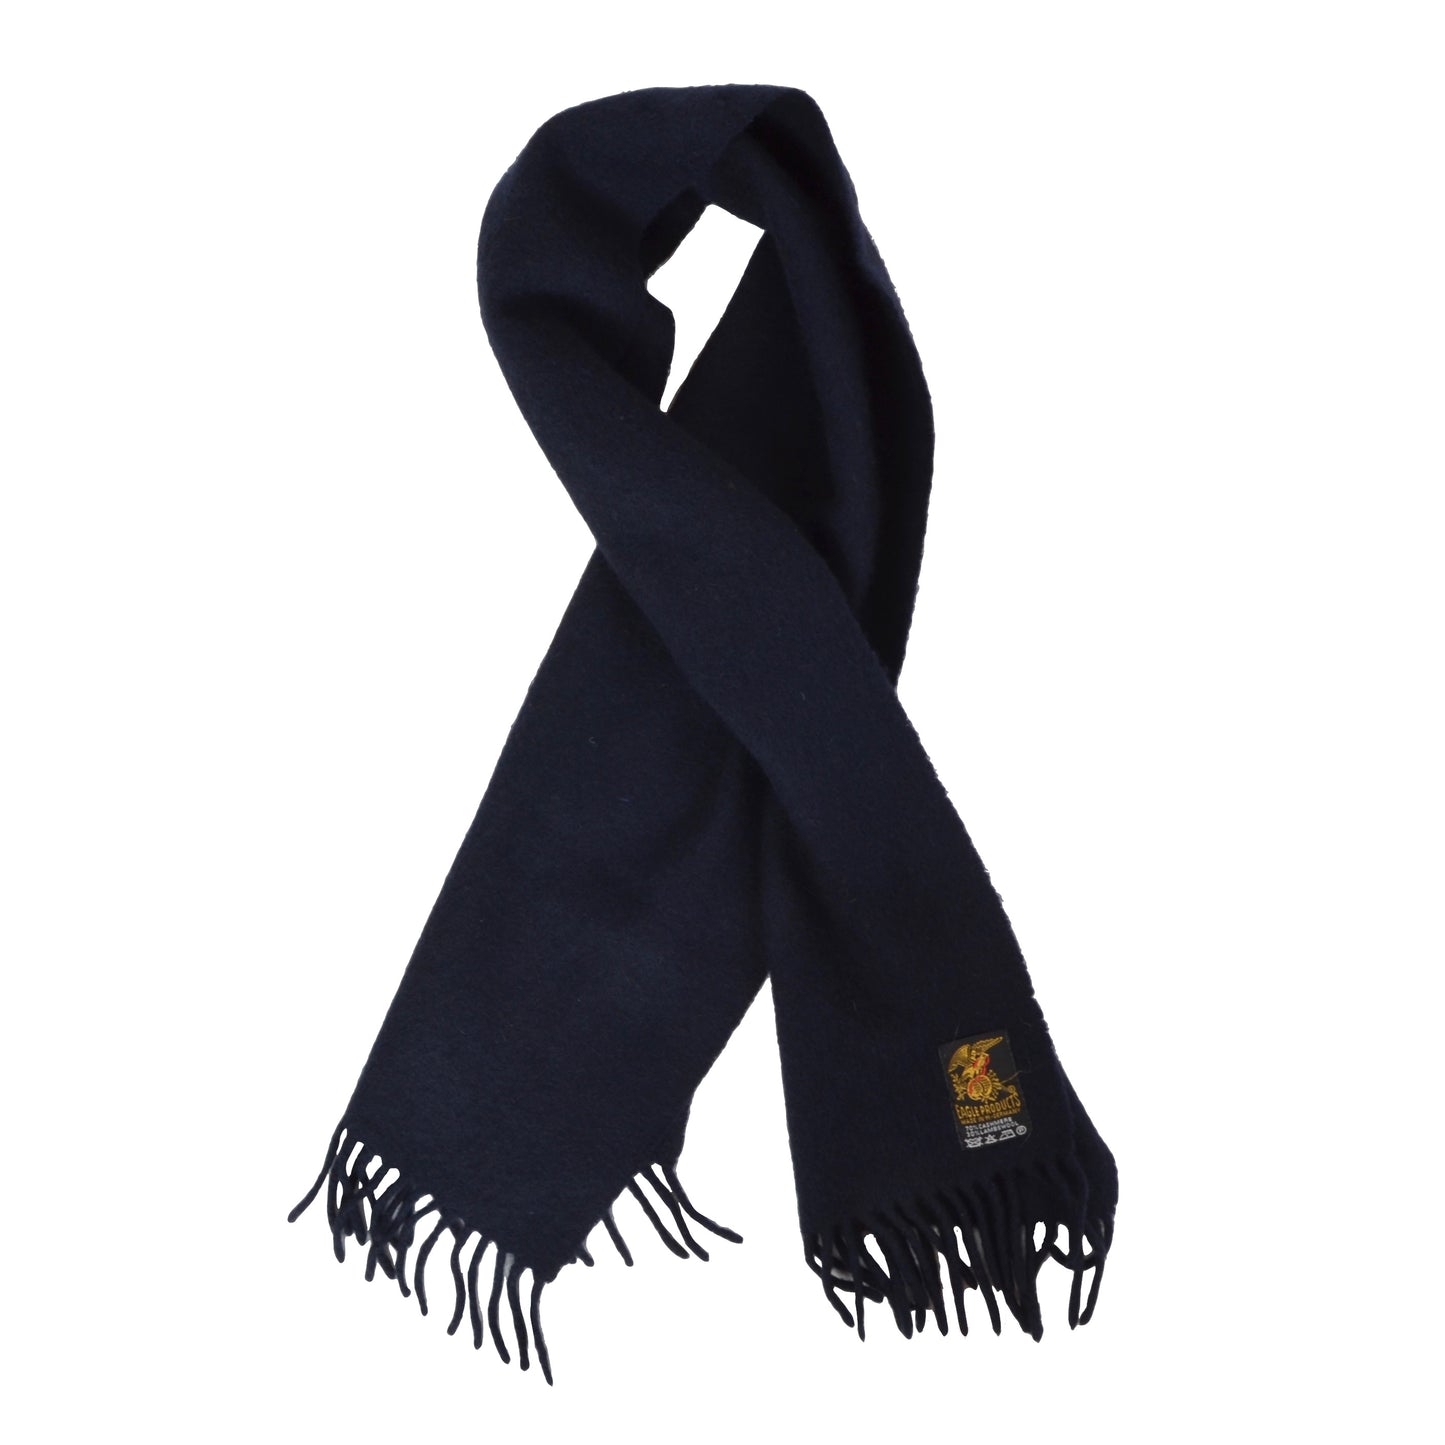 Eagle Products Cashmere/Wool Scarf - Navy Blue